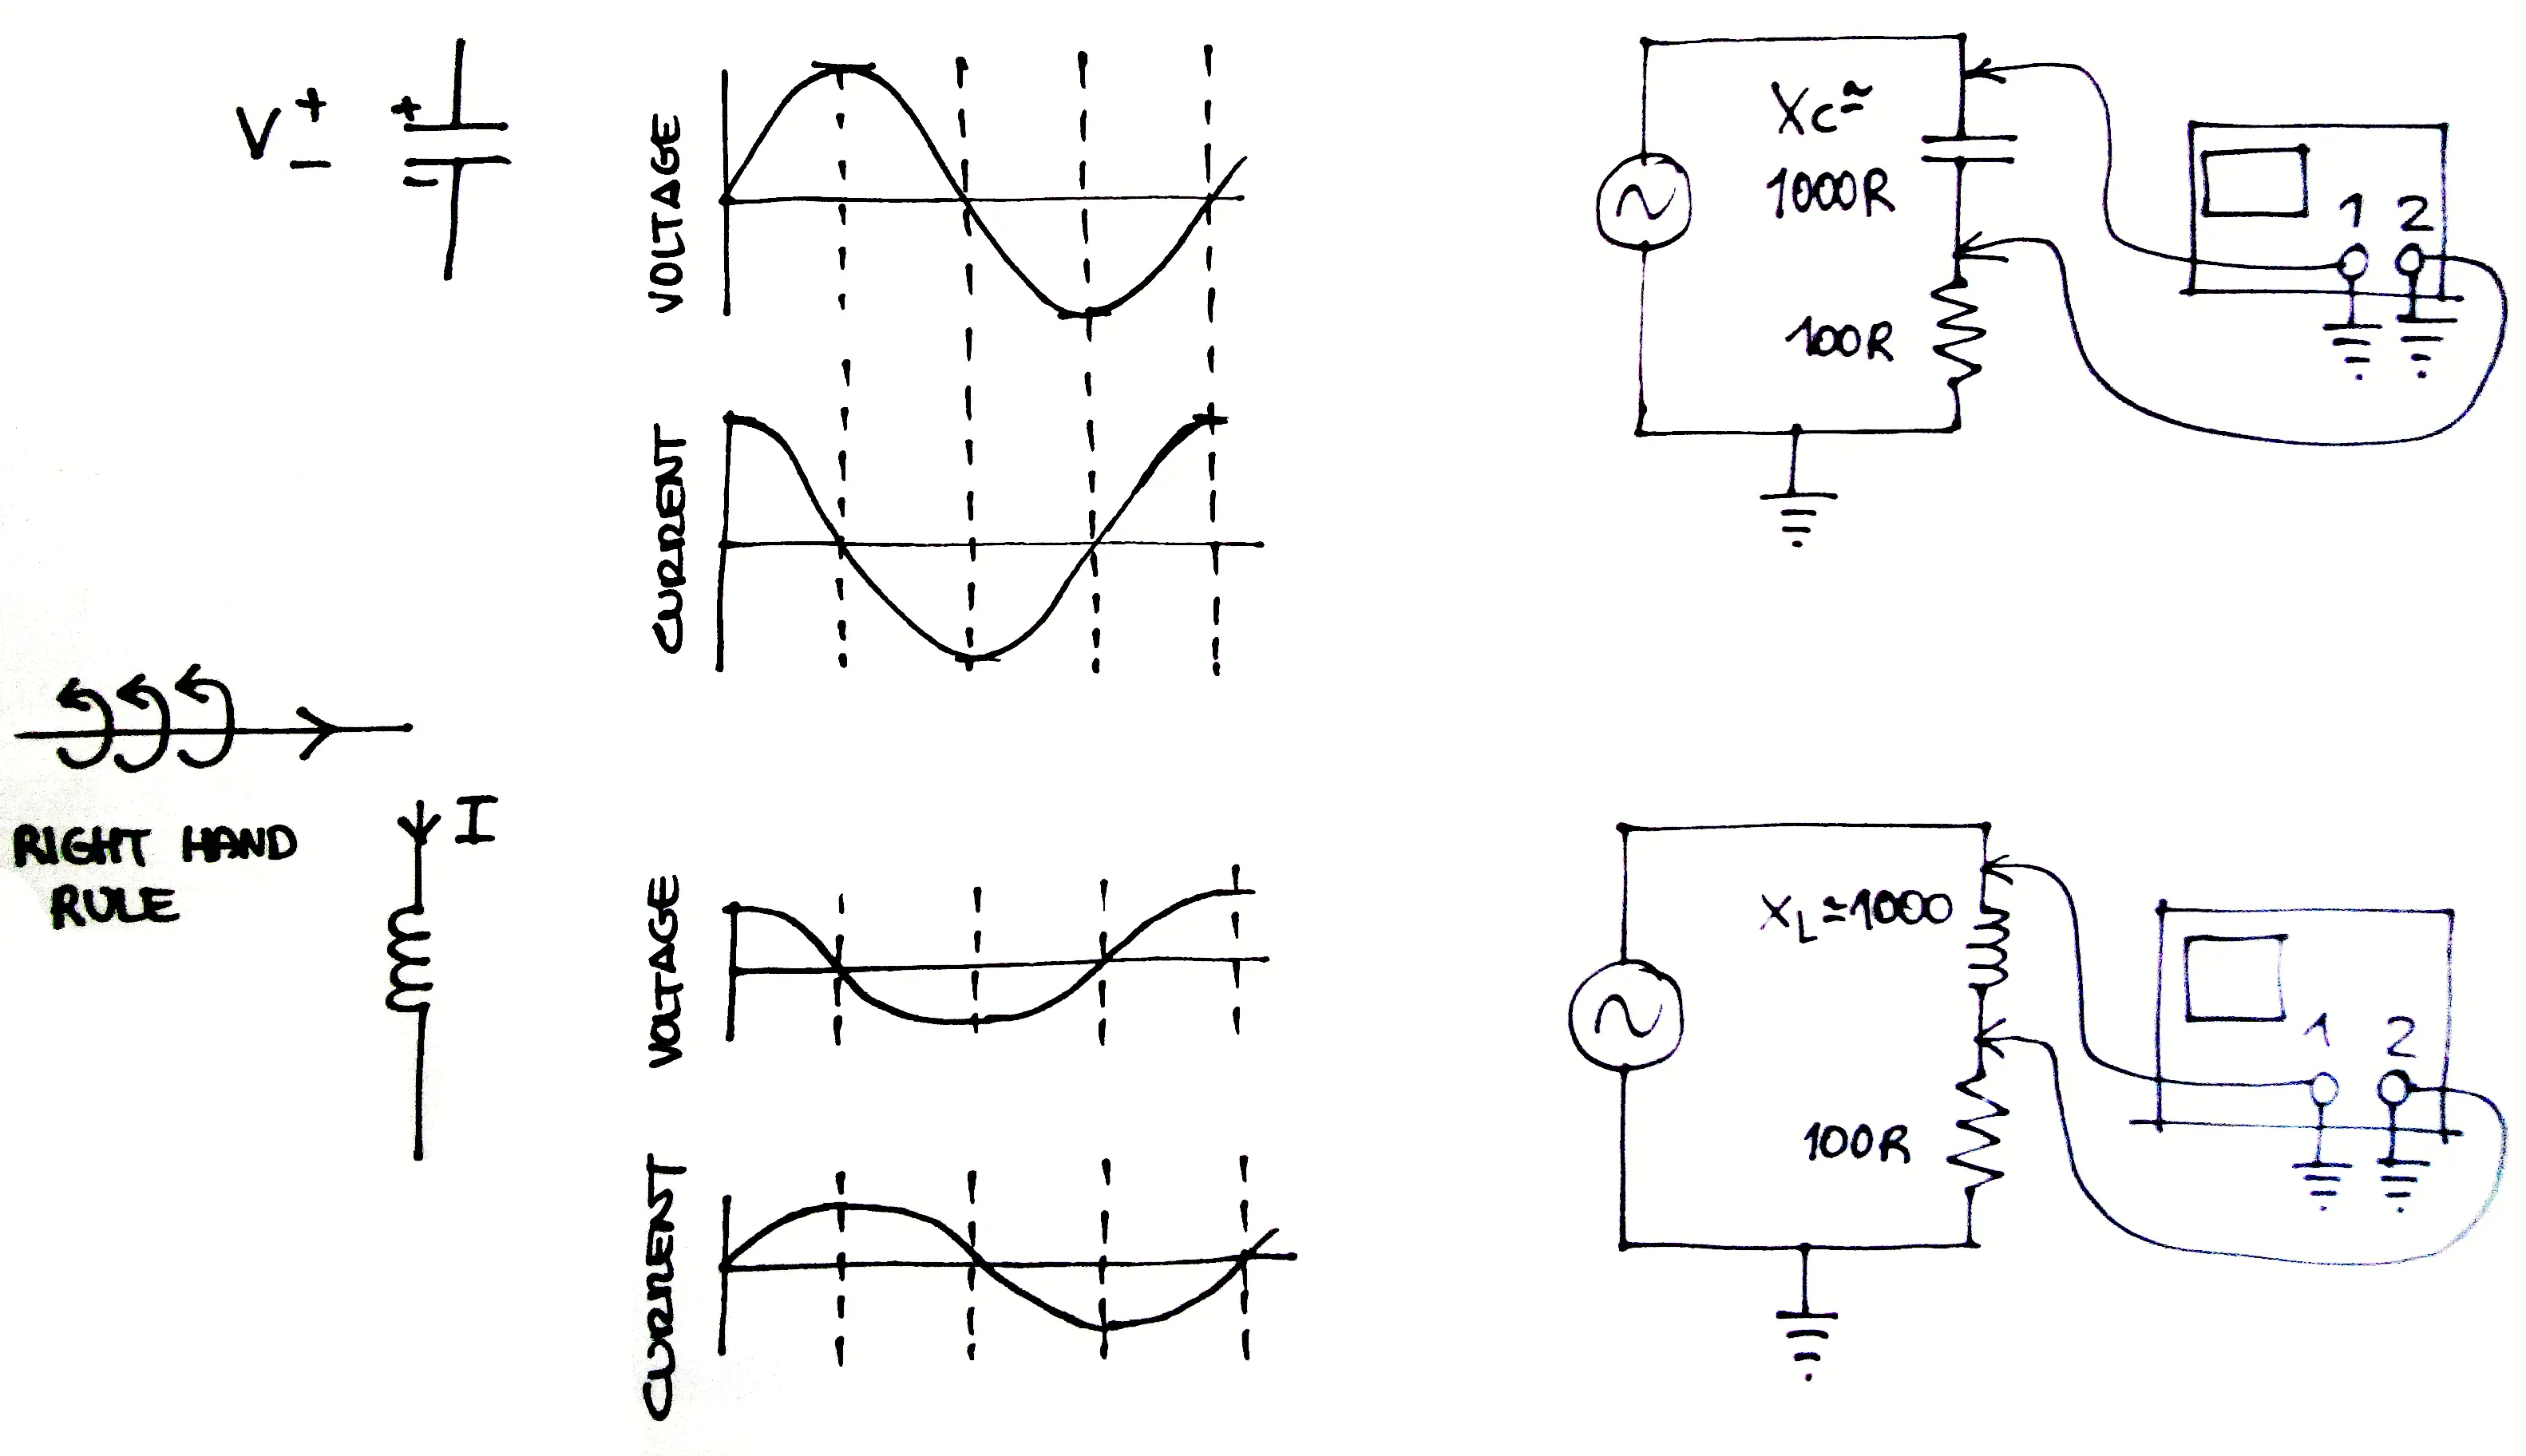 Voltage and current relationships for capacitors and inductors in AC circuits